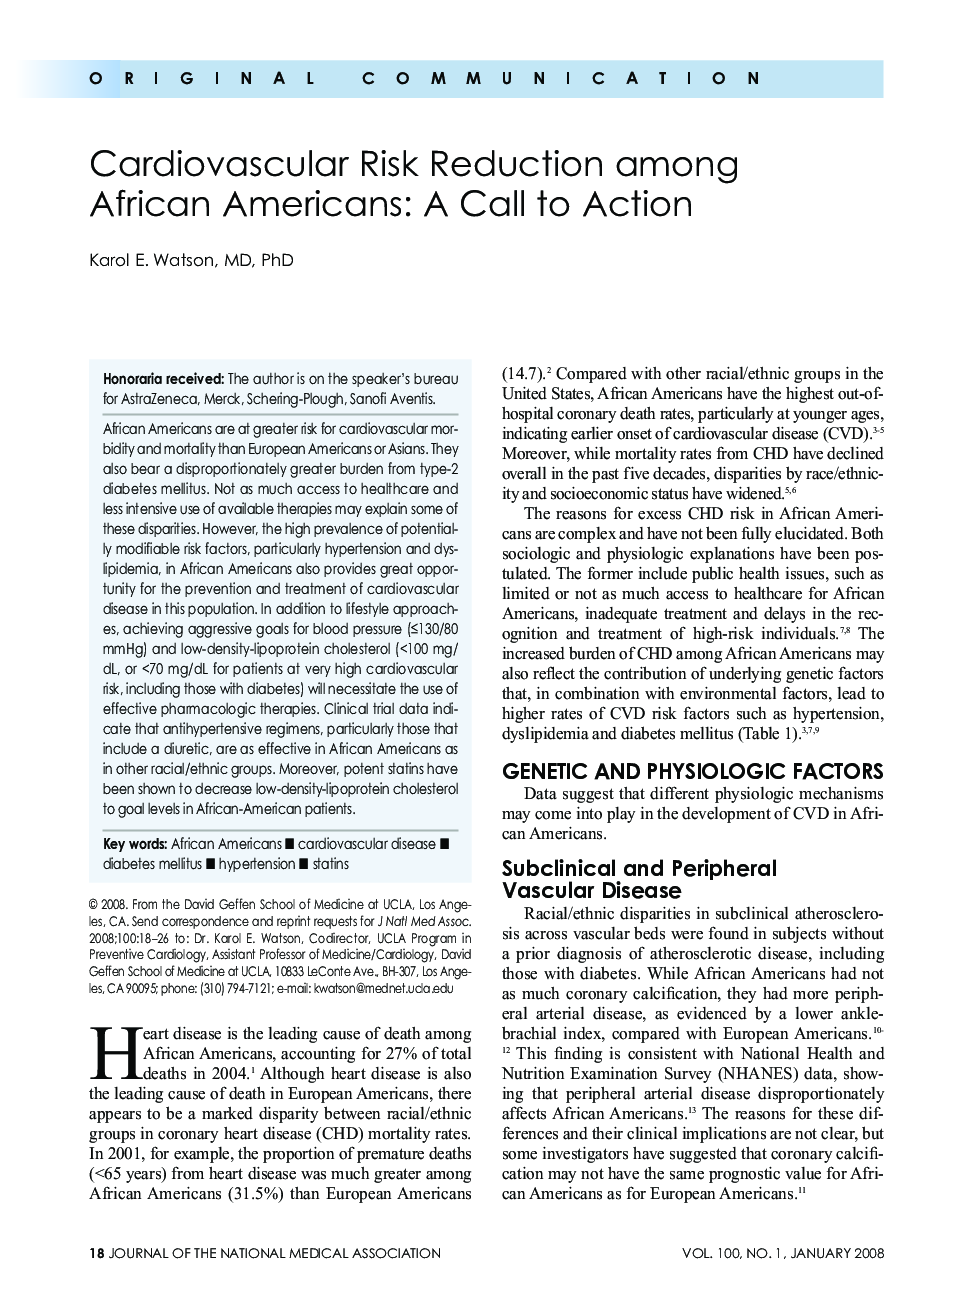 Cardiovascular Risk Reduction among African Americans: A Call to Action